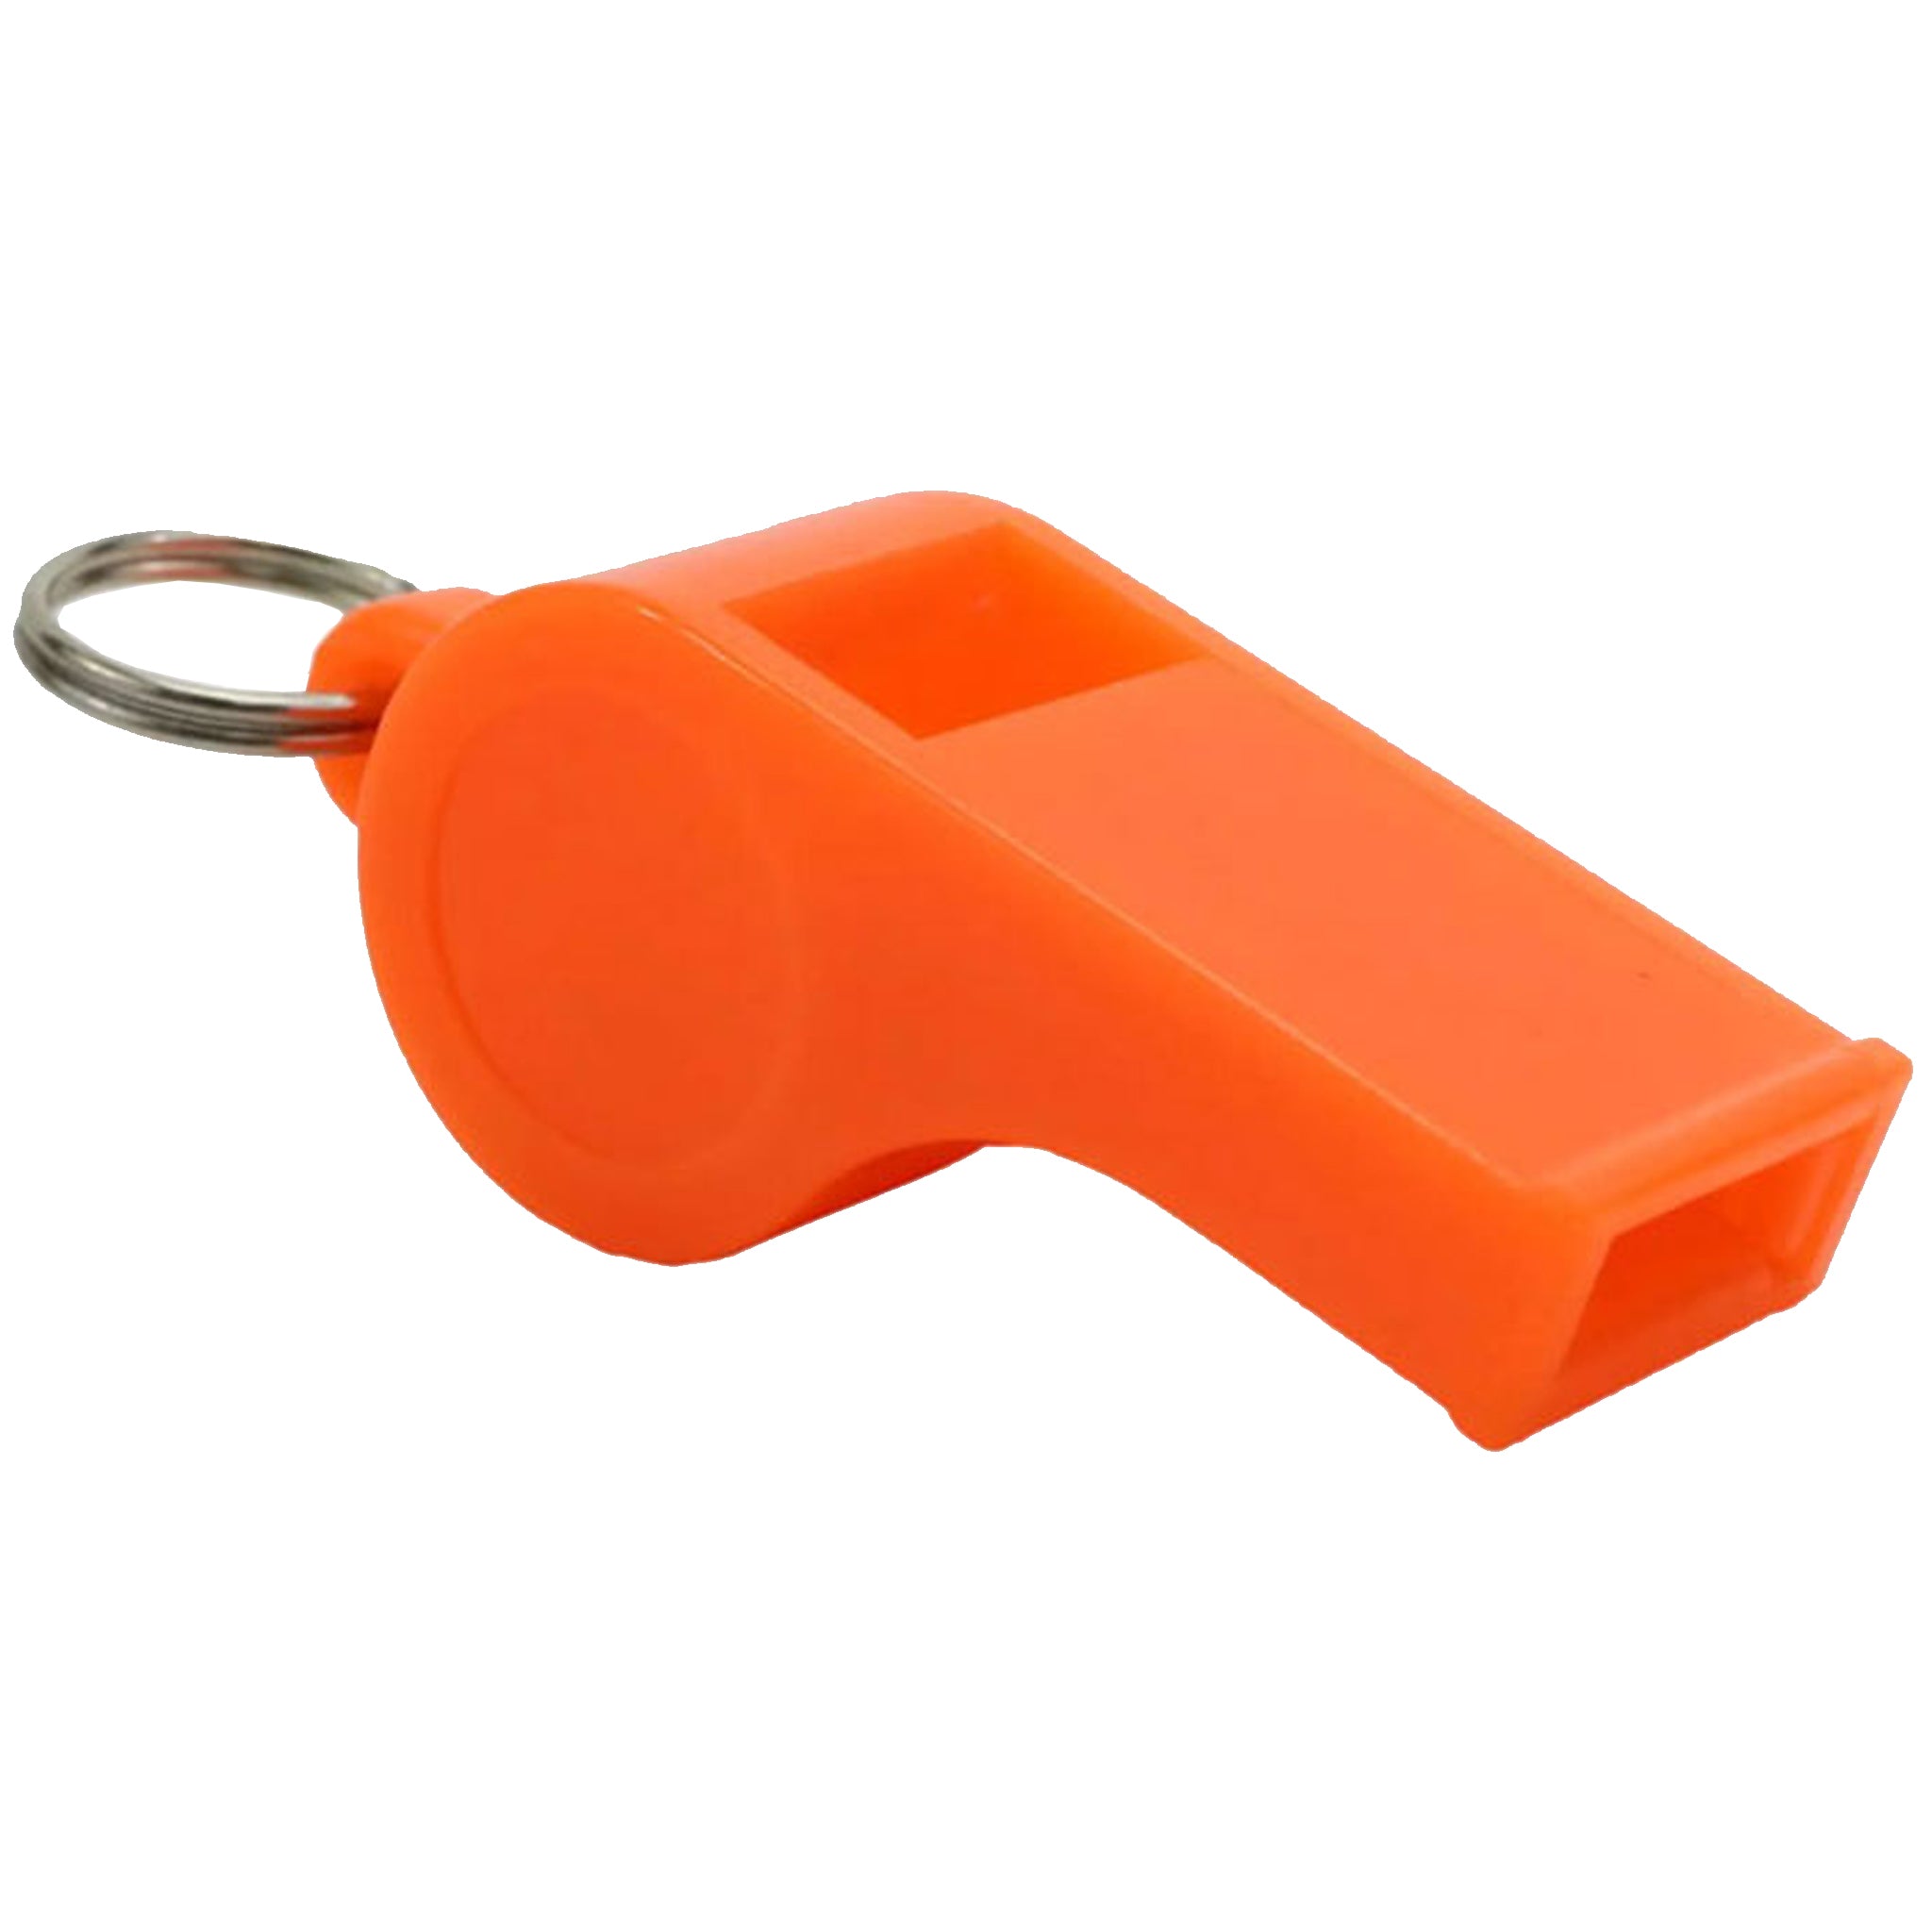 Aquatec Classic Safety Whistle